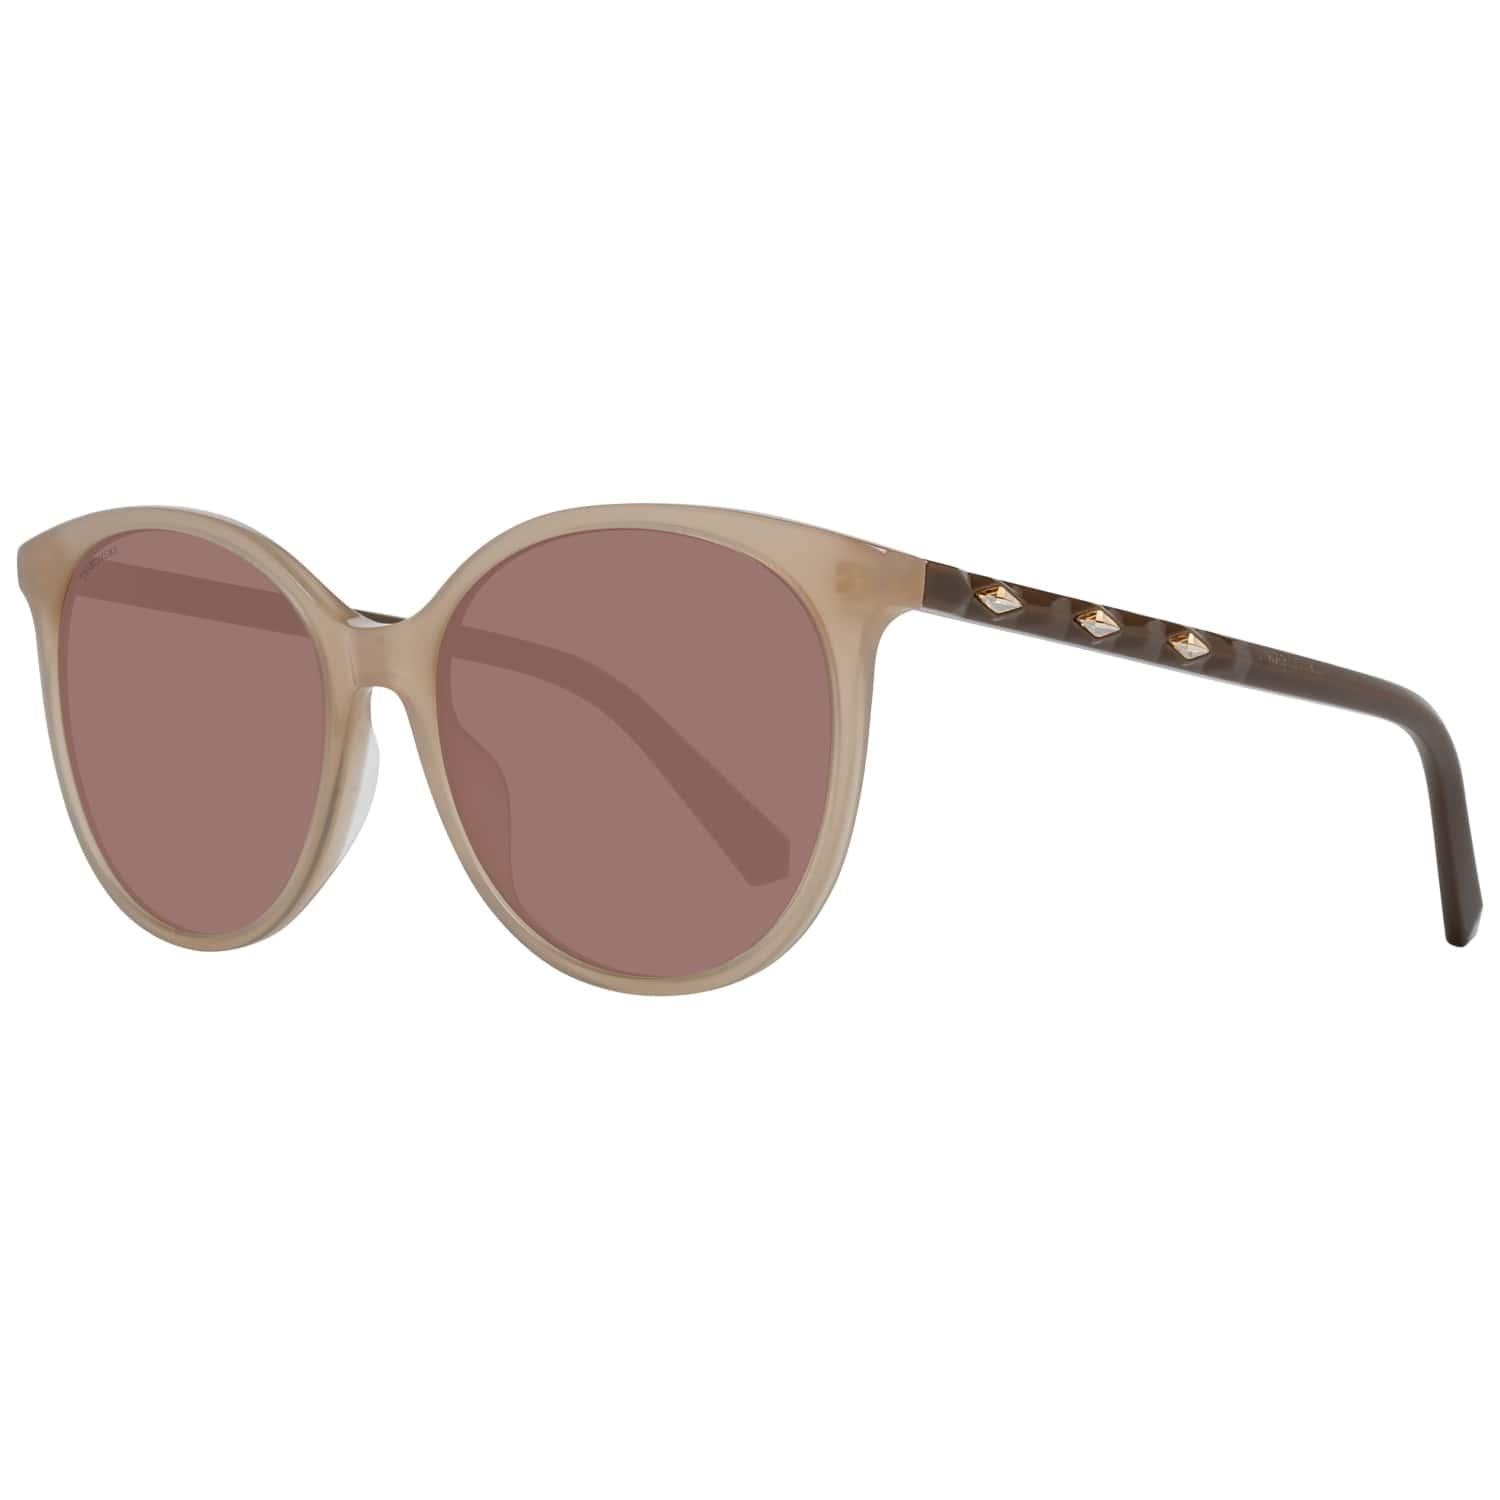 DetailsMATERIAL: AcetateCOLOR: CreamMODEL: SK0223 5645FGENDER: WomenCOUNTRY OF MANUFACTURE: ChinaTYPE: SunglassesORIGINAL CASE?: YesSTYLE: OvalOCCASION: CasualFEATURES: LightweightLENS COLOR: BrownLENS TECHNOLOGY: GradientYEAR MANUFACTURED: